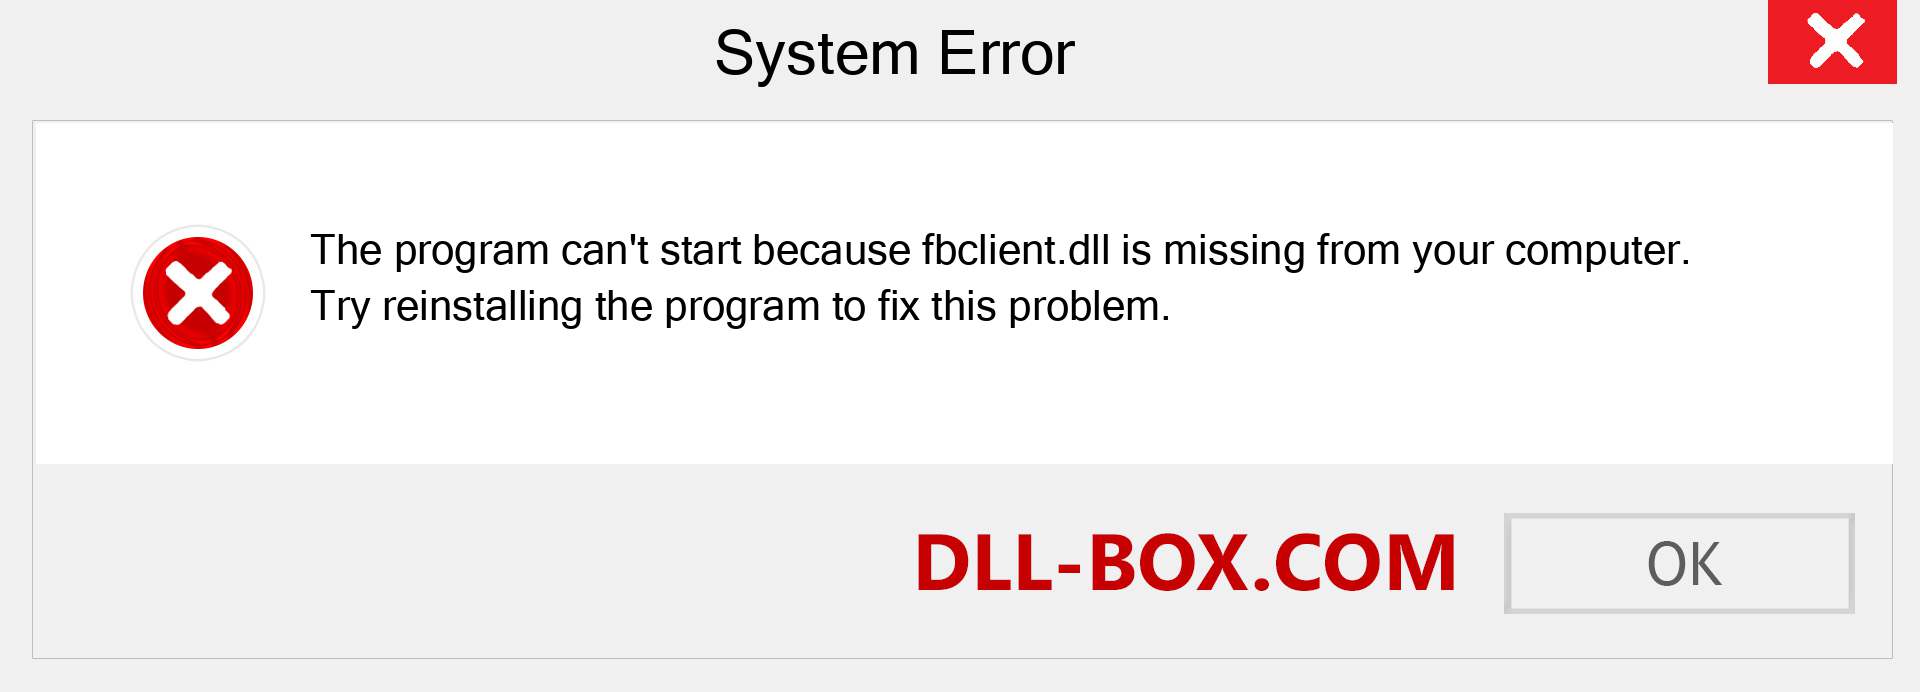  fbclient.dll file is missing?. Download for Windows 7, 8, 10 - Fix  fbclient dll Missing Error on Windows, photos, images